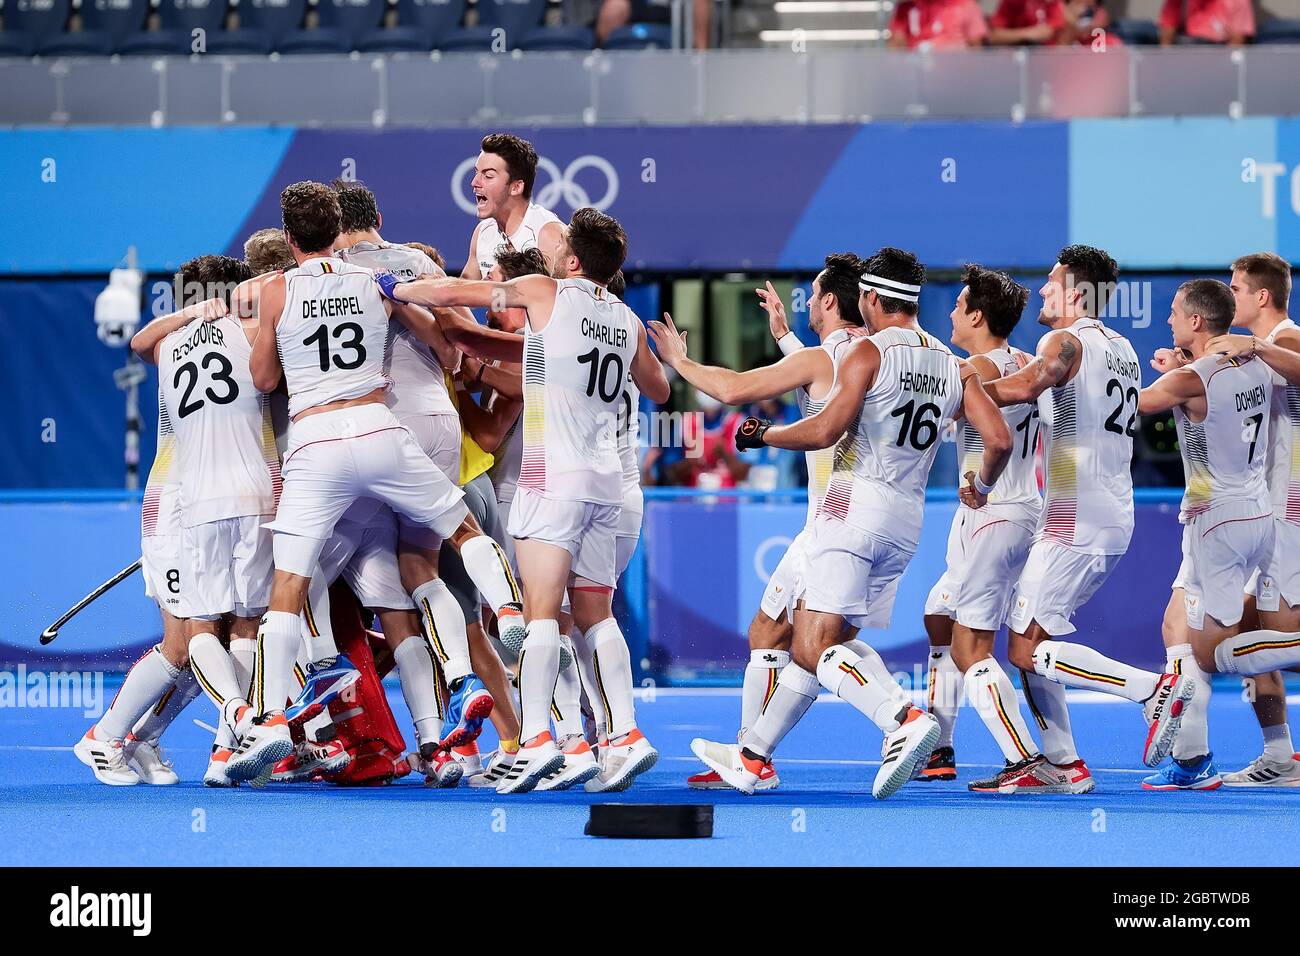 Tokyo, Japan, 5 August, 2021. Belgium players celebrate winning gold during the Men's Hockey Gold Medal match between Australia and Belgium on Day 13 of the Tokyo 2020 Olympic Games. Credit: Pete Dovgan/Speed Media/Alamy Live News Stock Photo